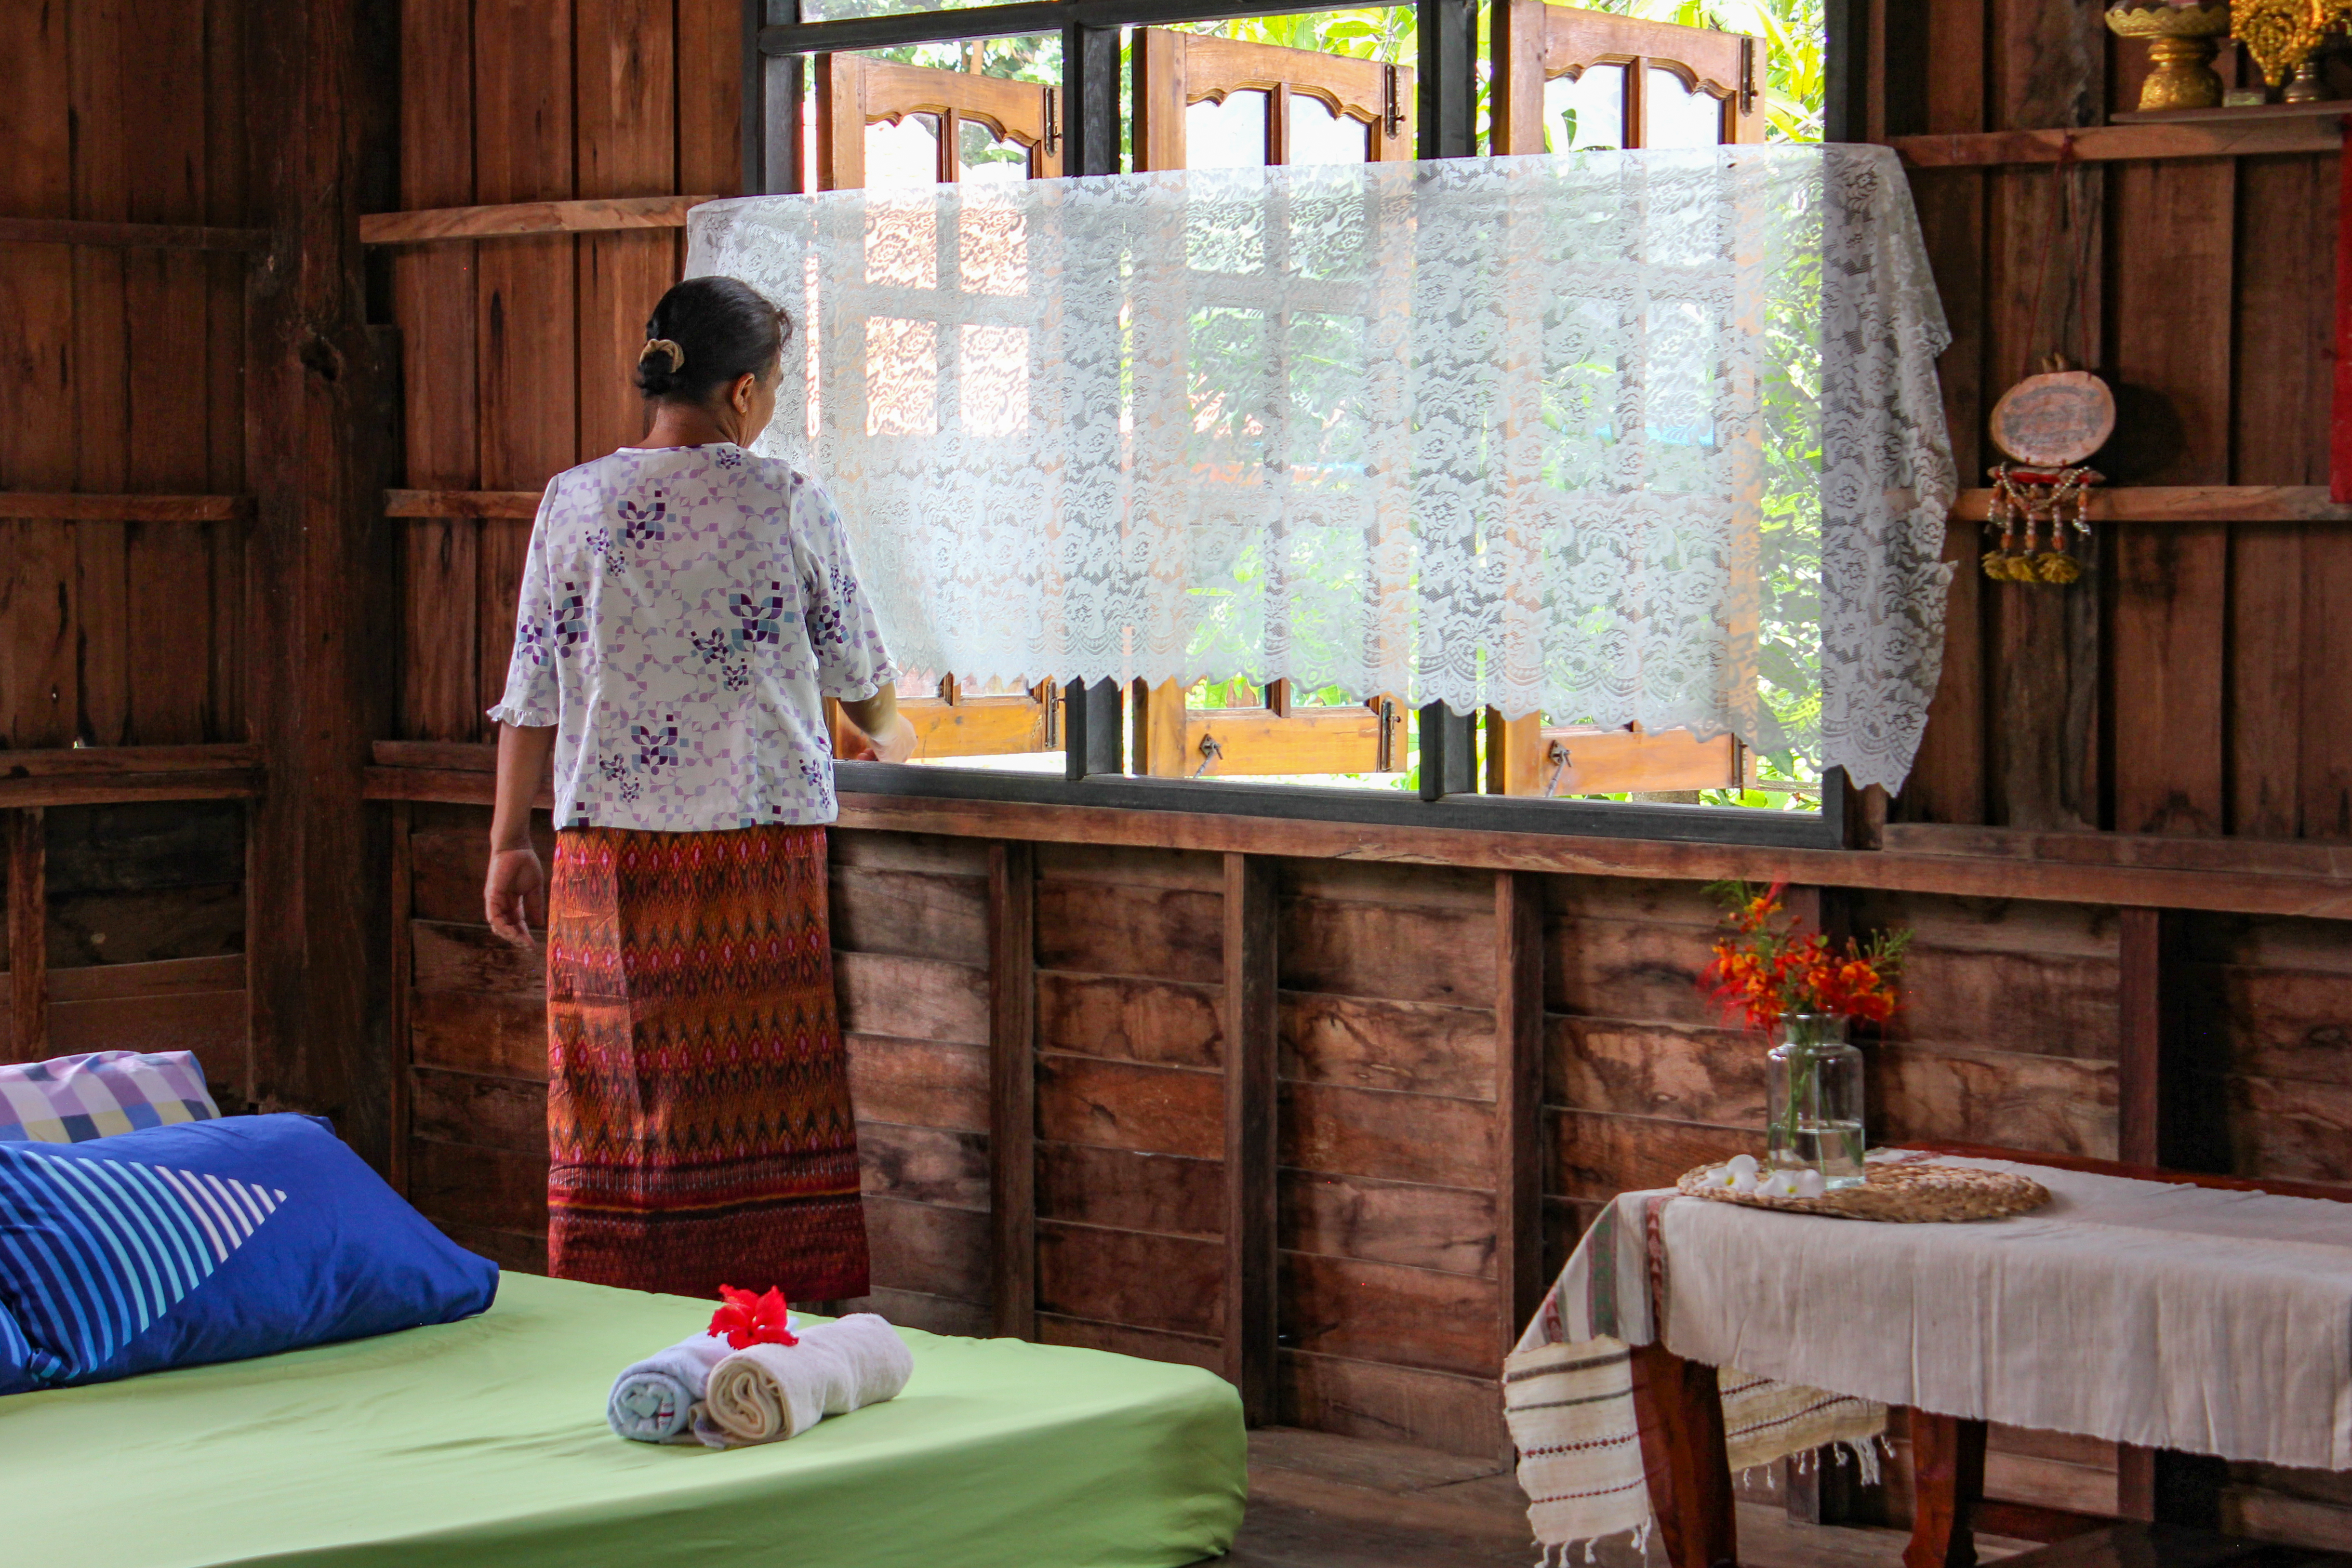 A host cleans and prepares her bedroom for her next Airbnb guest in Buriram, Thailand.